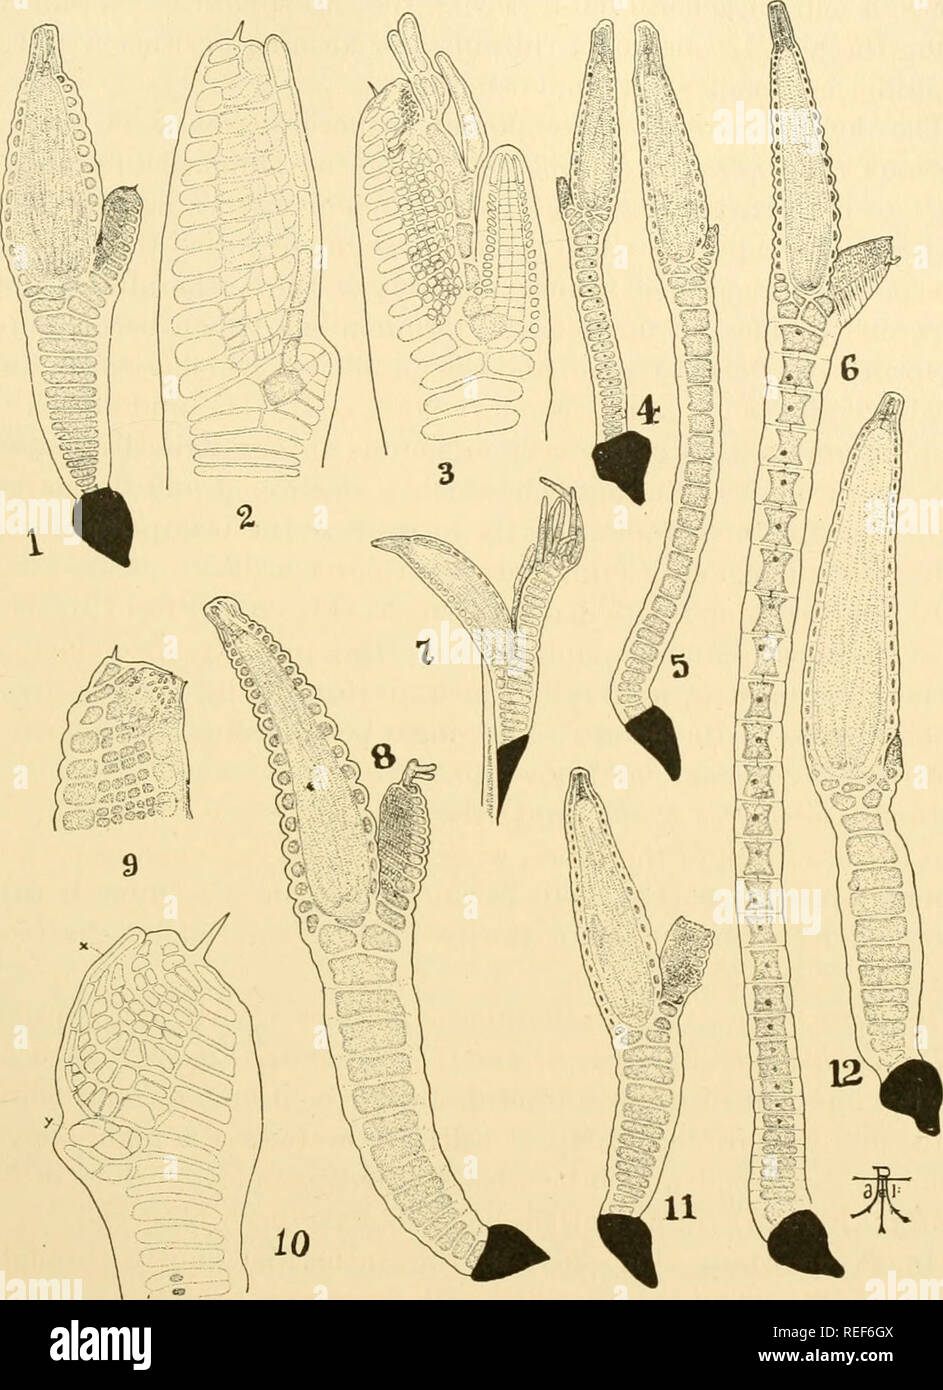 . Comparative morphology of Fungi. Fungi. LABOULBENIALES 387. Fig. 261.— Tettigomyces africanus. 1. Mature individual. 2. Young antheridium showing relation of adnate trichogyne to antheridial cells and carpogenic cell. 3. Older antheridium; the adnate trichogyne with two free branchlets seen sidewise, and showing necks and discharging spermatia. 4, 5. Tettigomyces intermedins, showing the antheridia disorganized. 6. Tettigomyces gracilis. 7. Tettigomyces chaetophilus, showing free tricho- gyne. 8. Tettigomyces Gryllotalpae. 9. Tettigomyces vulgaris, showing the tip of anther- dial appendage b Stock Photo